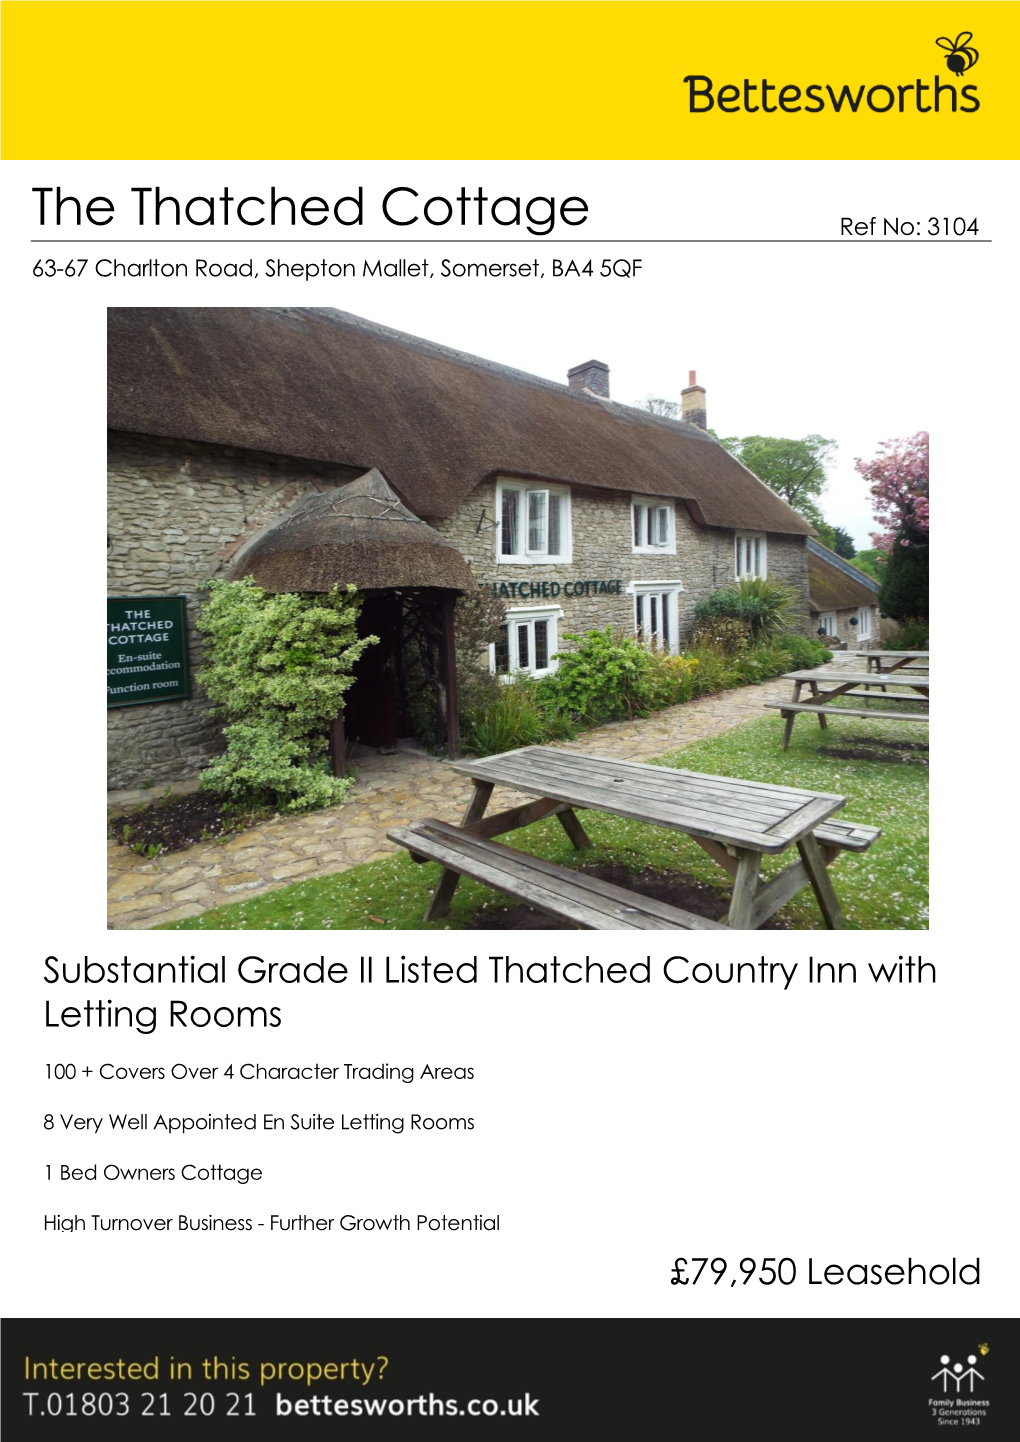 The Thatched Cottage Ref No: 3104